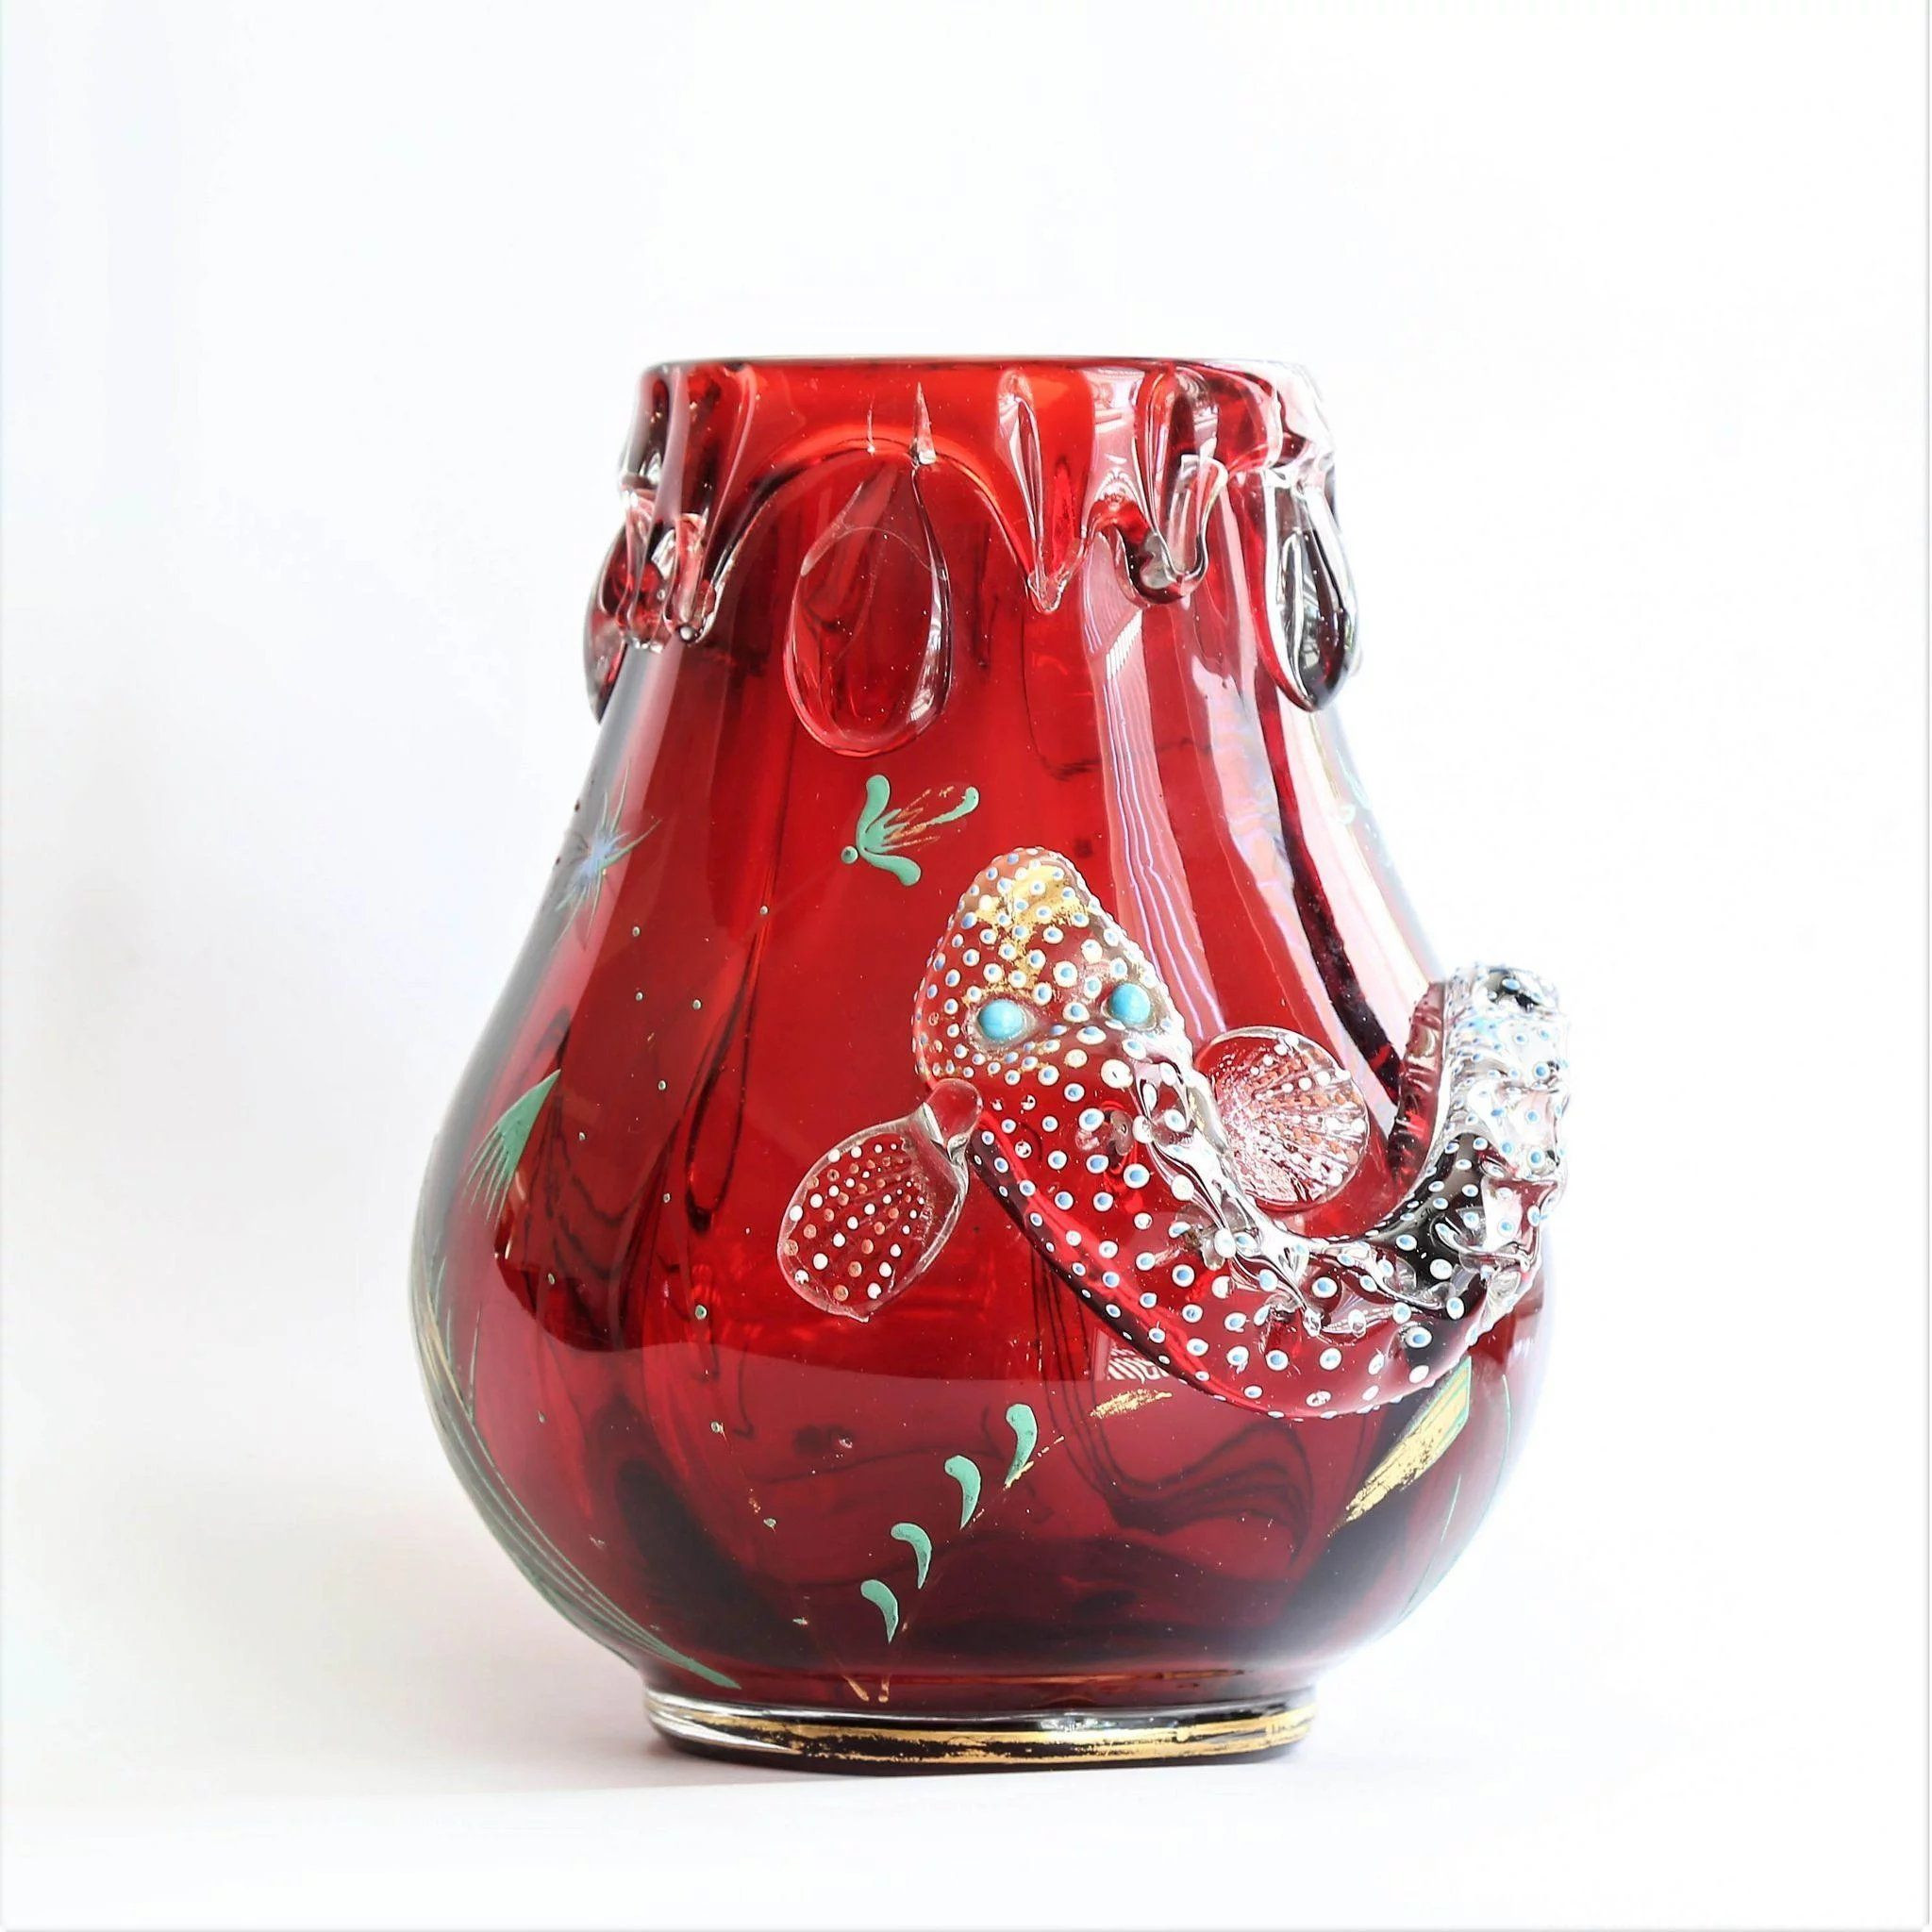 18 Best Tall Red Vase 2024 free download tall red vase of rare circa 1900 moser ruby red vase with enameled fish in 2018 regarding title rare circa 1900 moser ruby red vase with enameled fish price 995